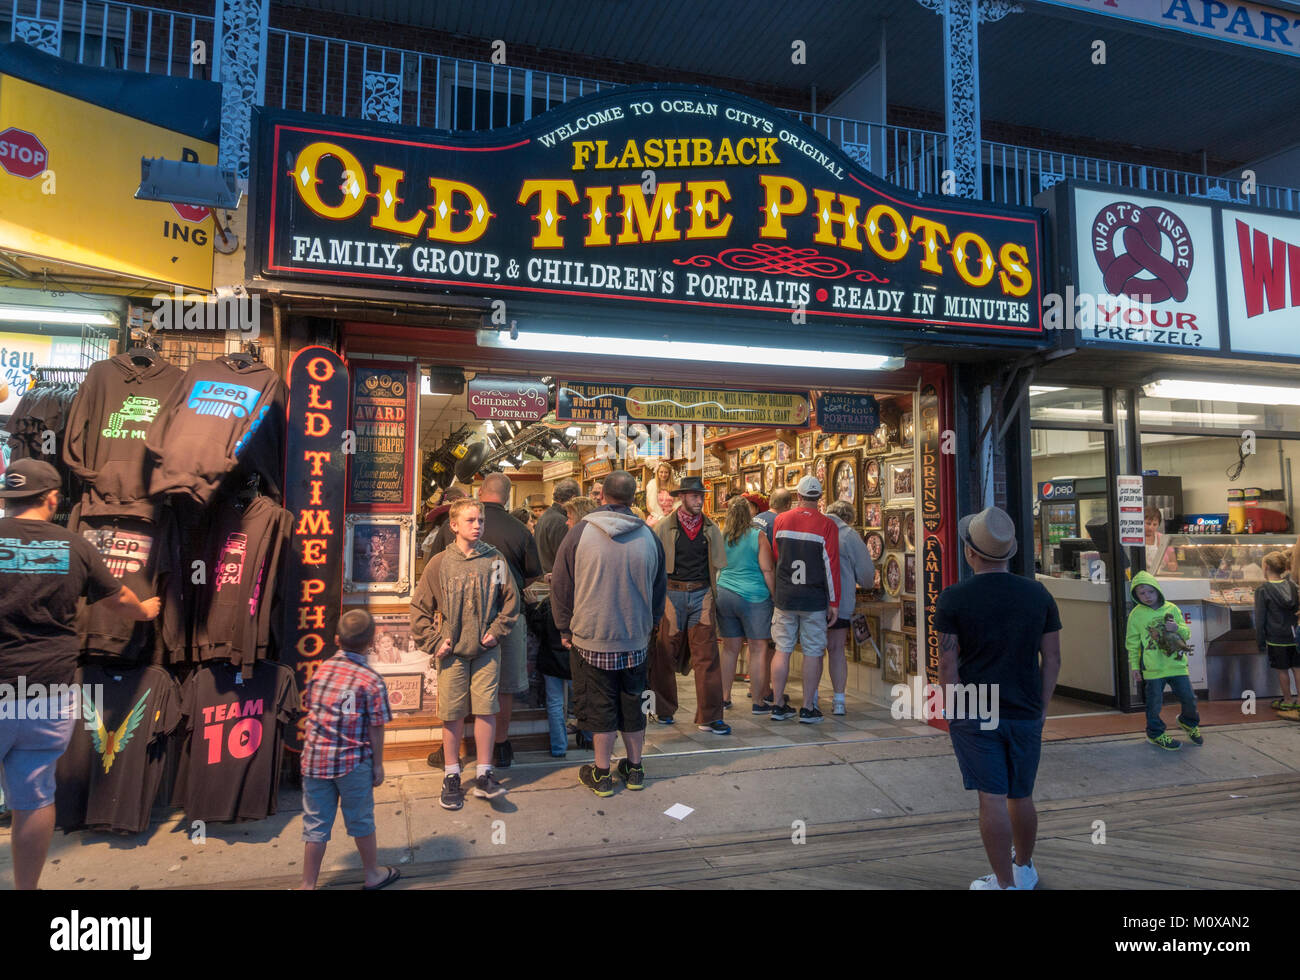 An outlet of Flashback Old Time Photos shop on the Boardwalk in Ocean City, Maryland, United States. Stock Photo